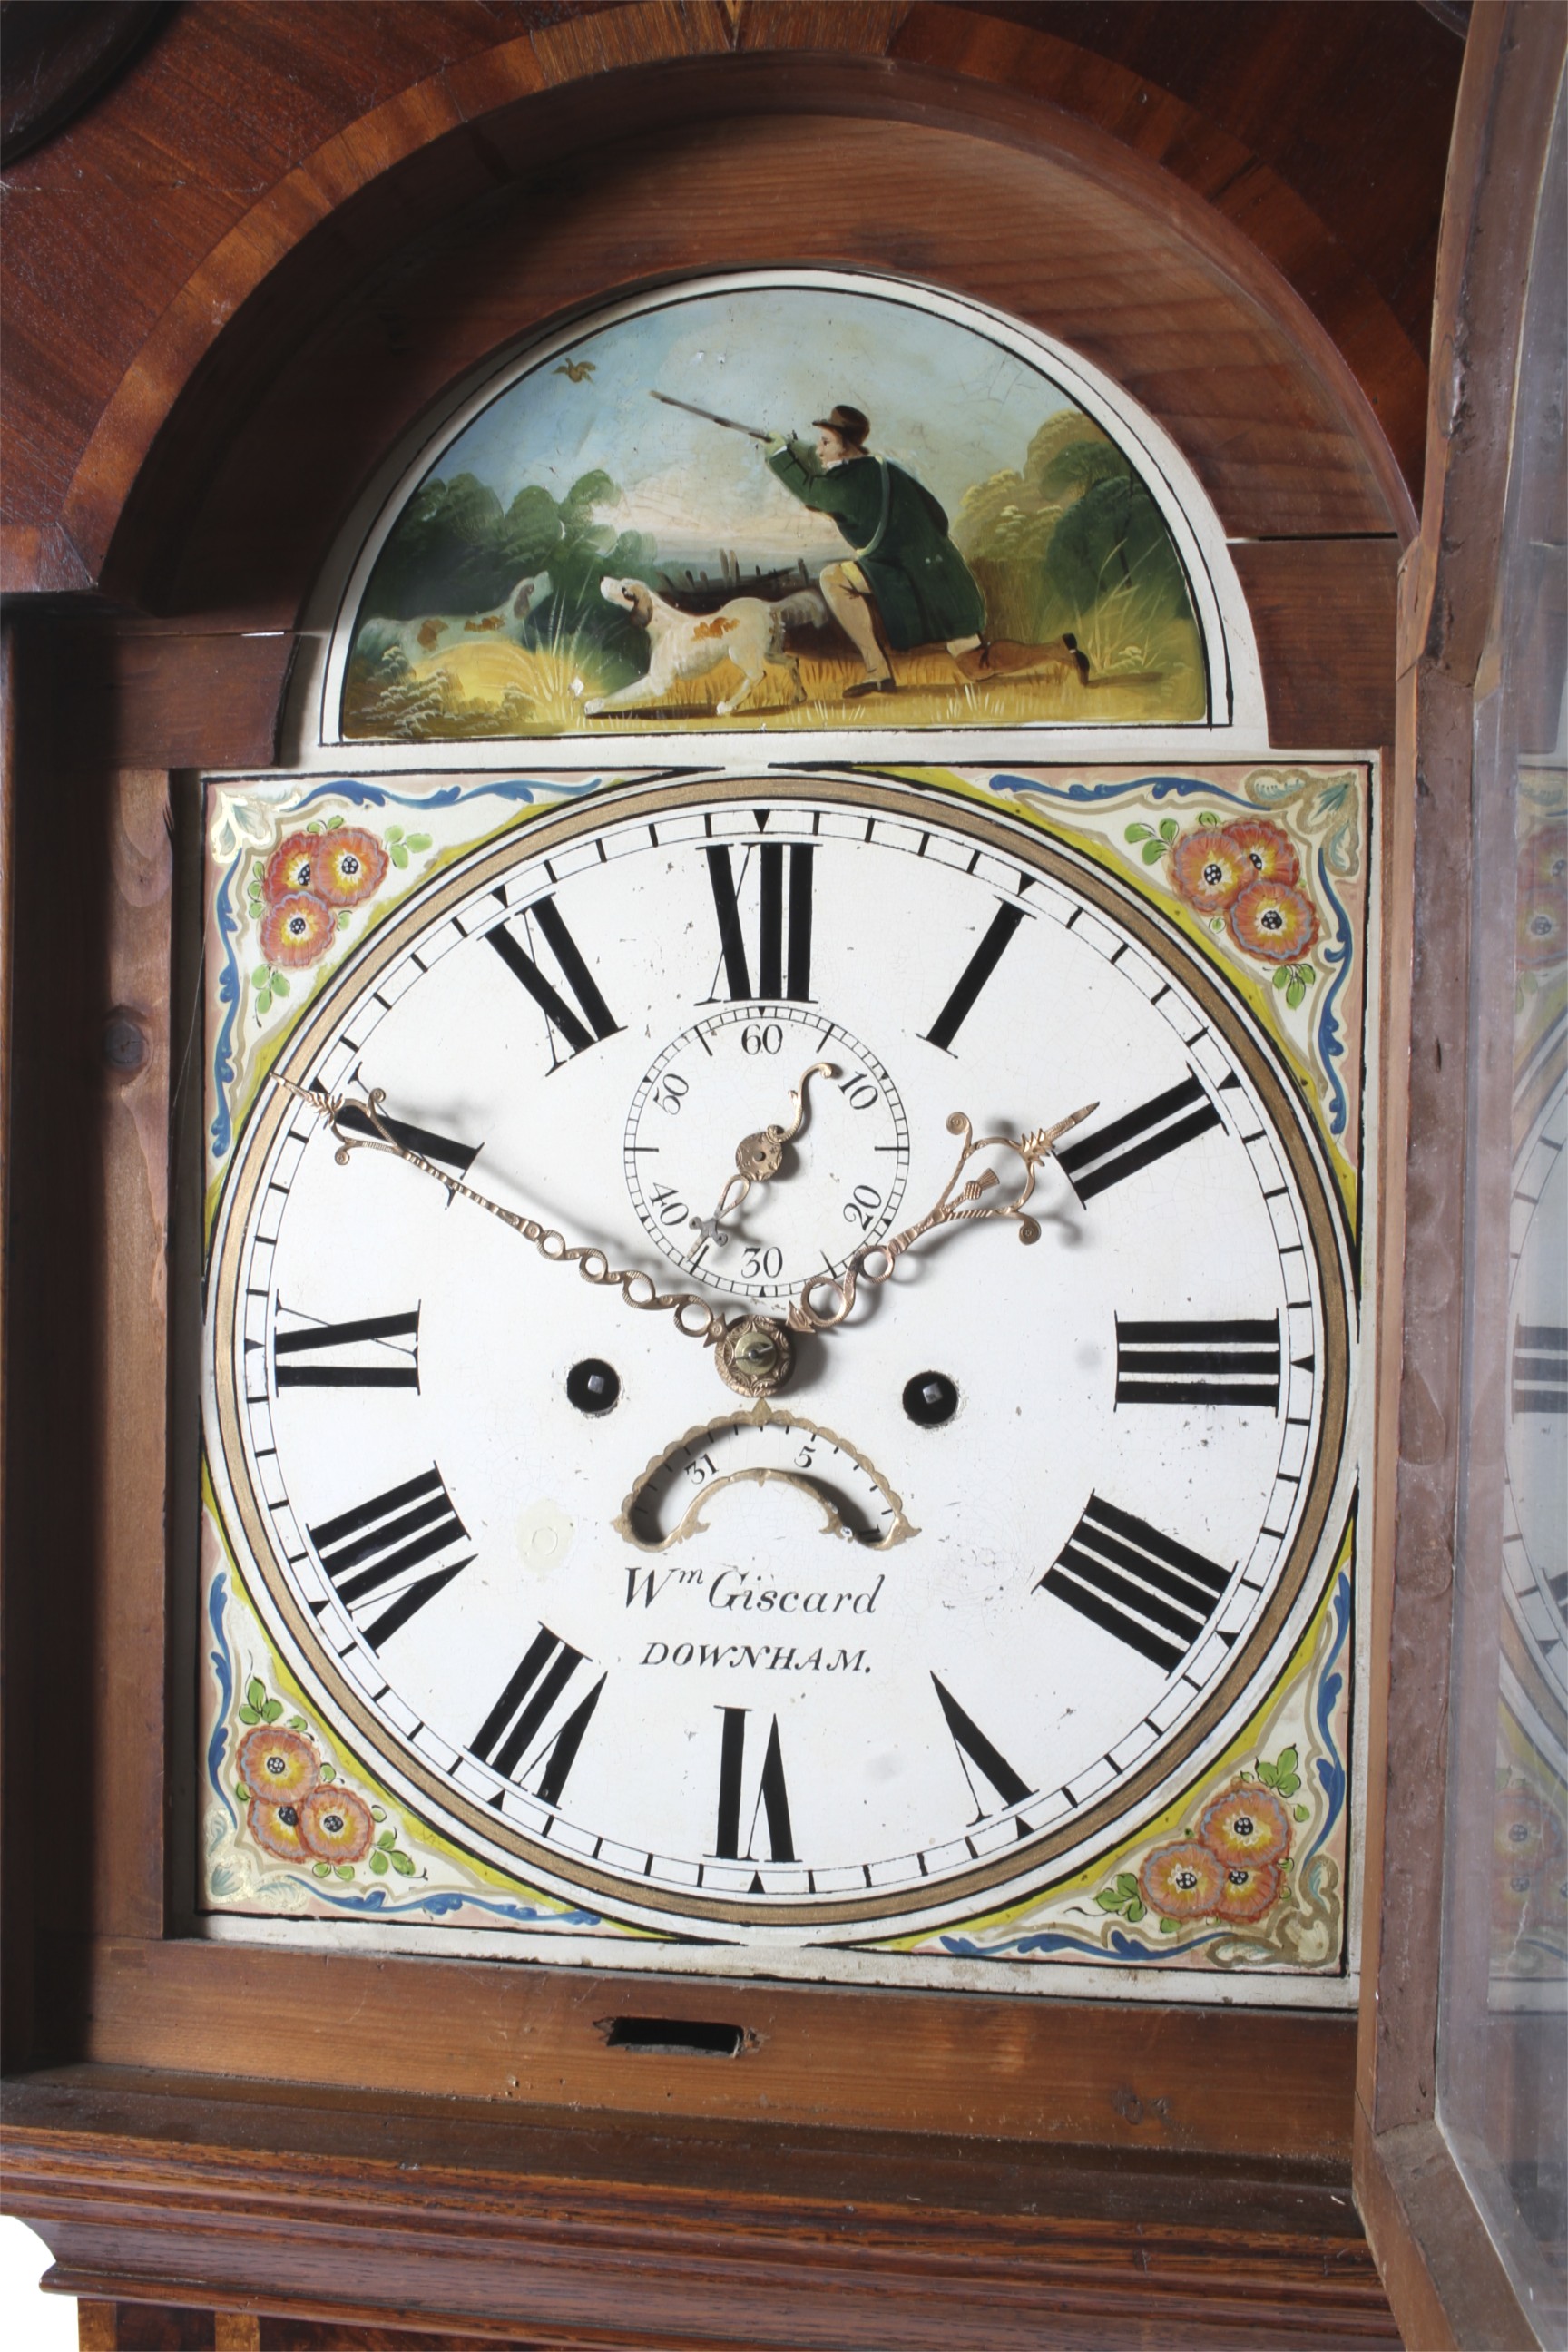 An early 19th century oak longcase clock, the white painted dial named for Wm Giscard/Downham, - Image 2 of 3